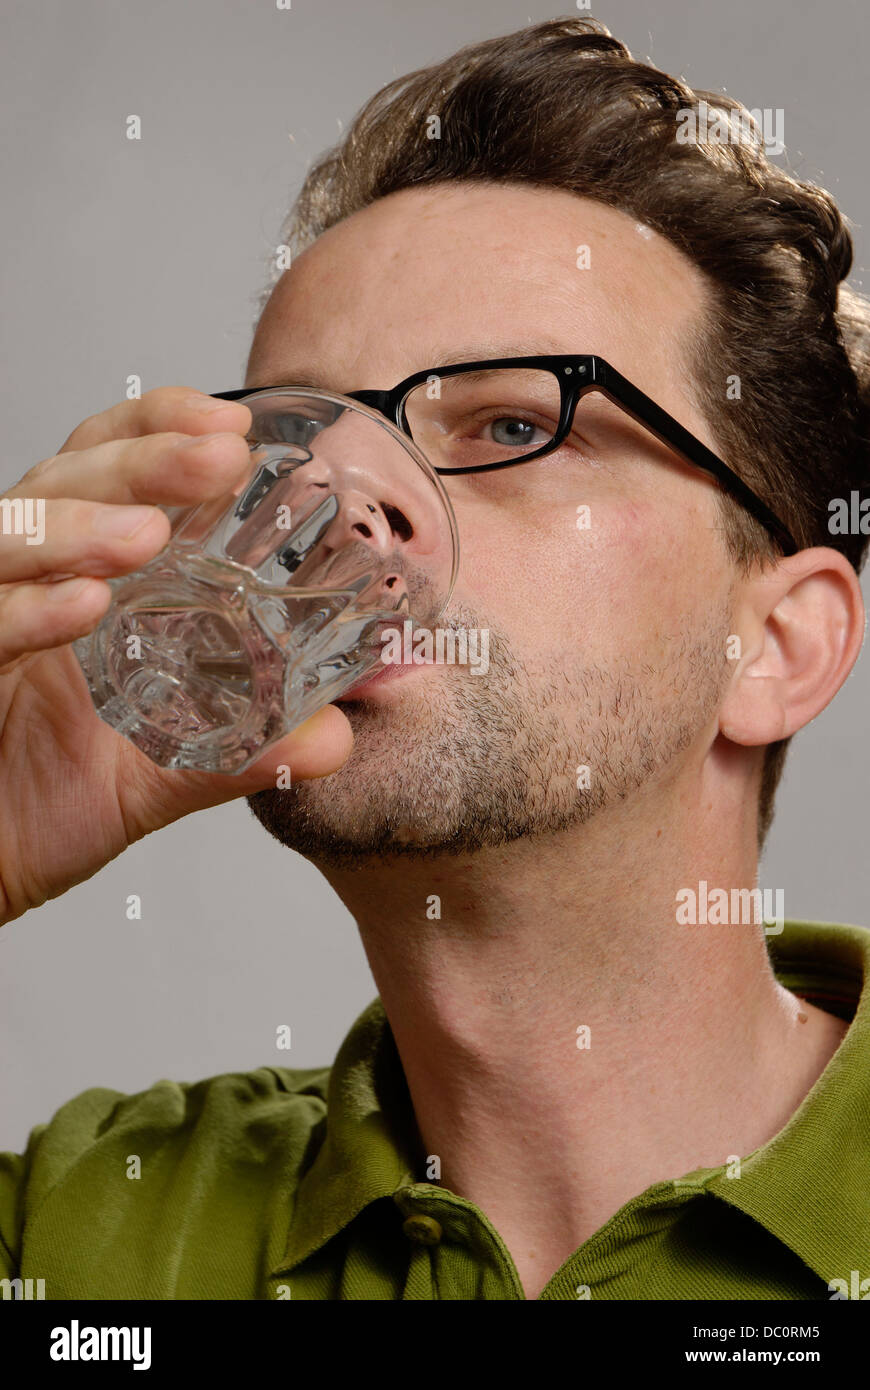 A man drinks a glass of water Stock Photo